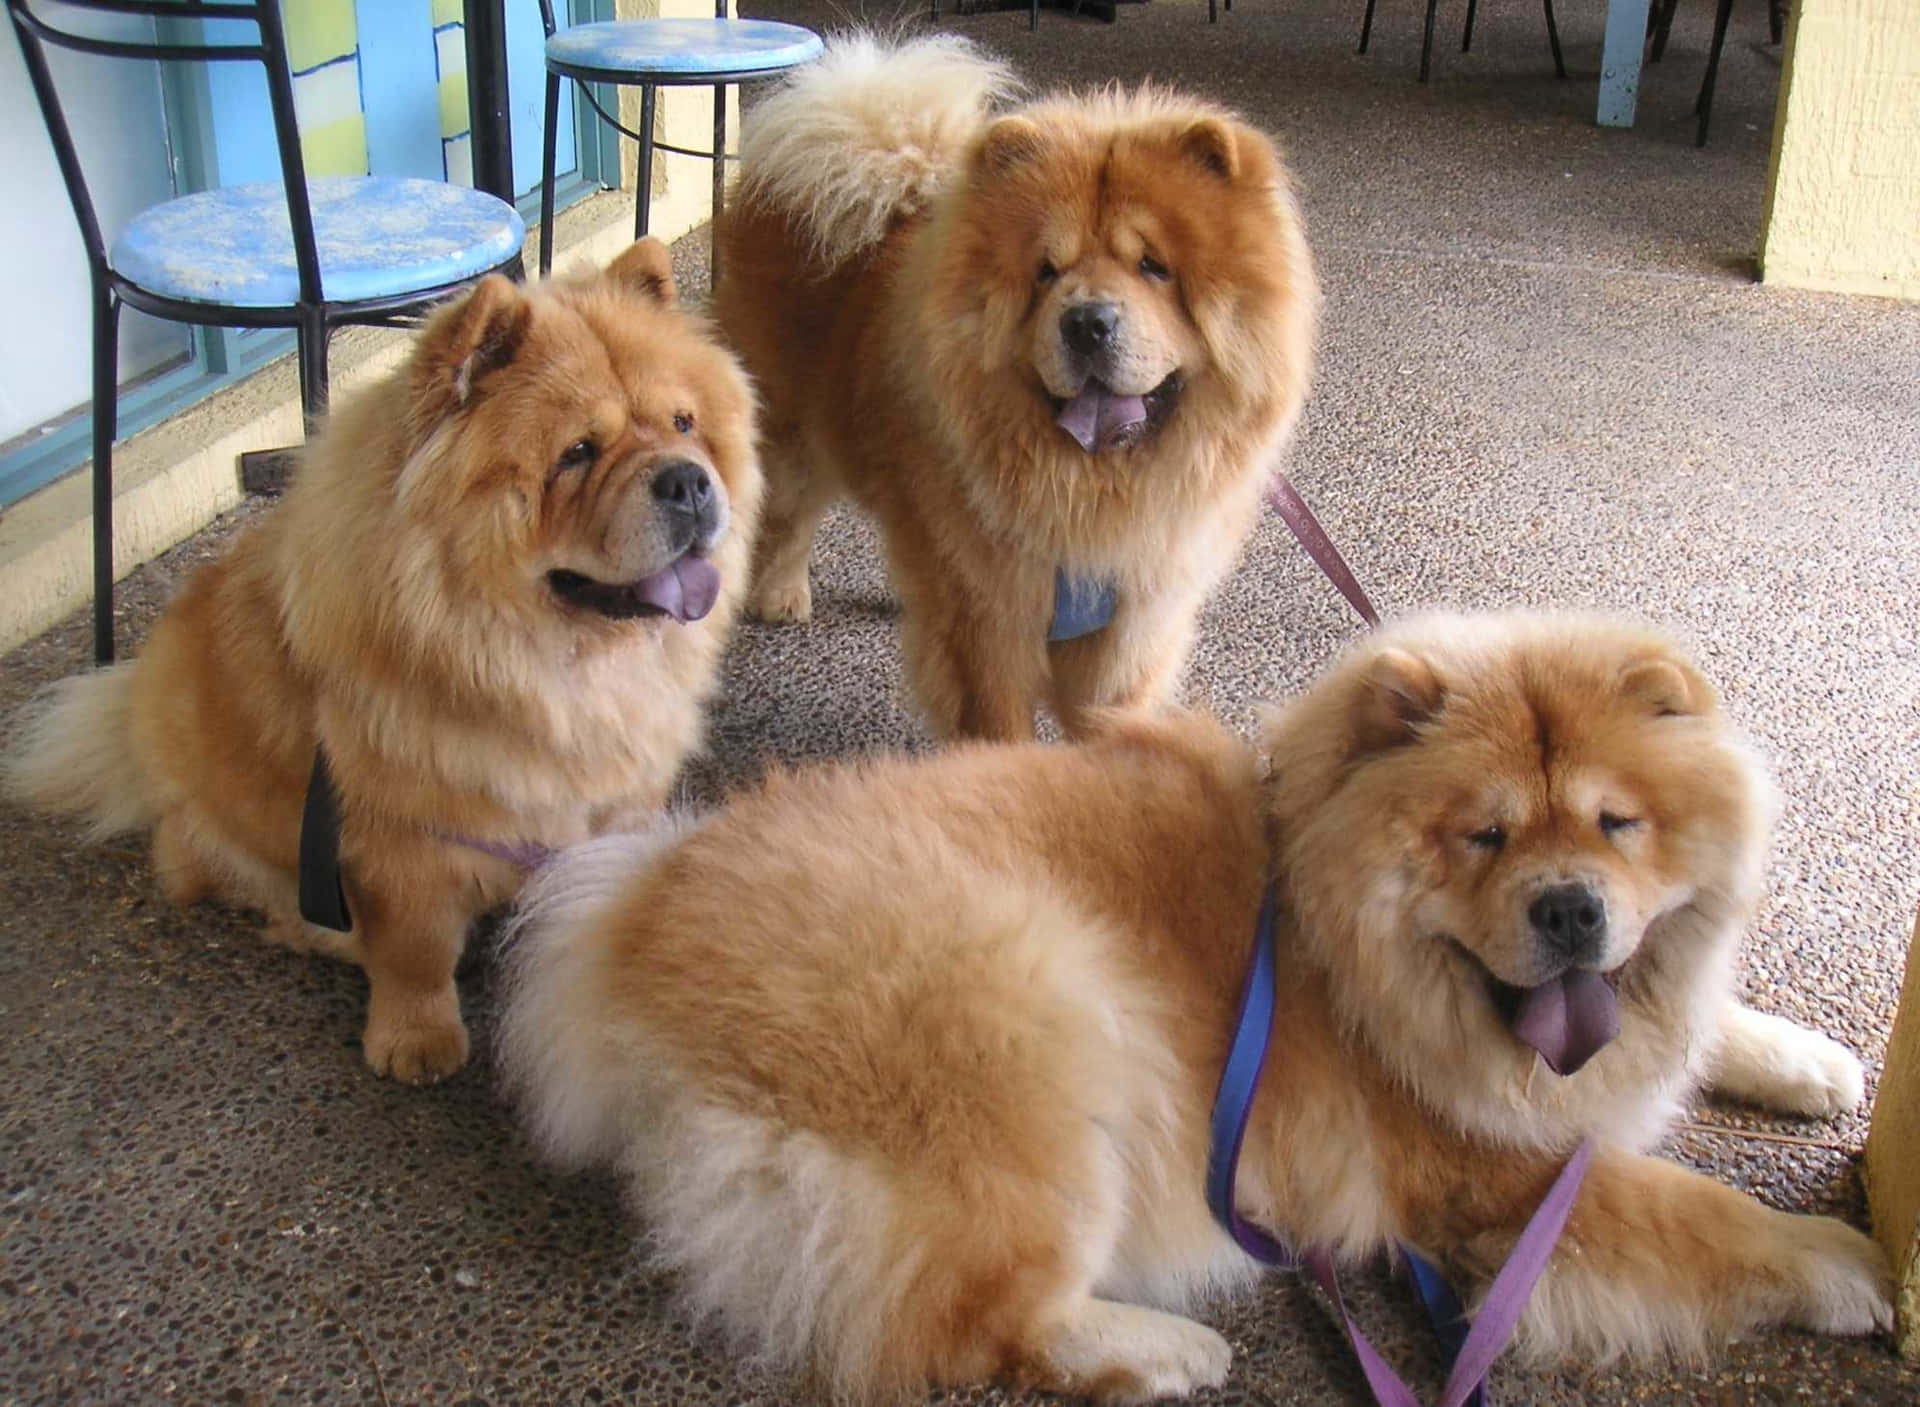 Adorable Chow Chow Puppy